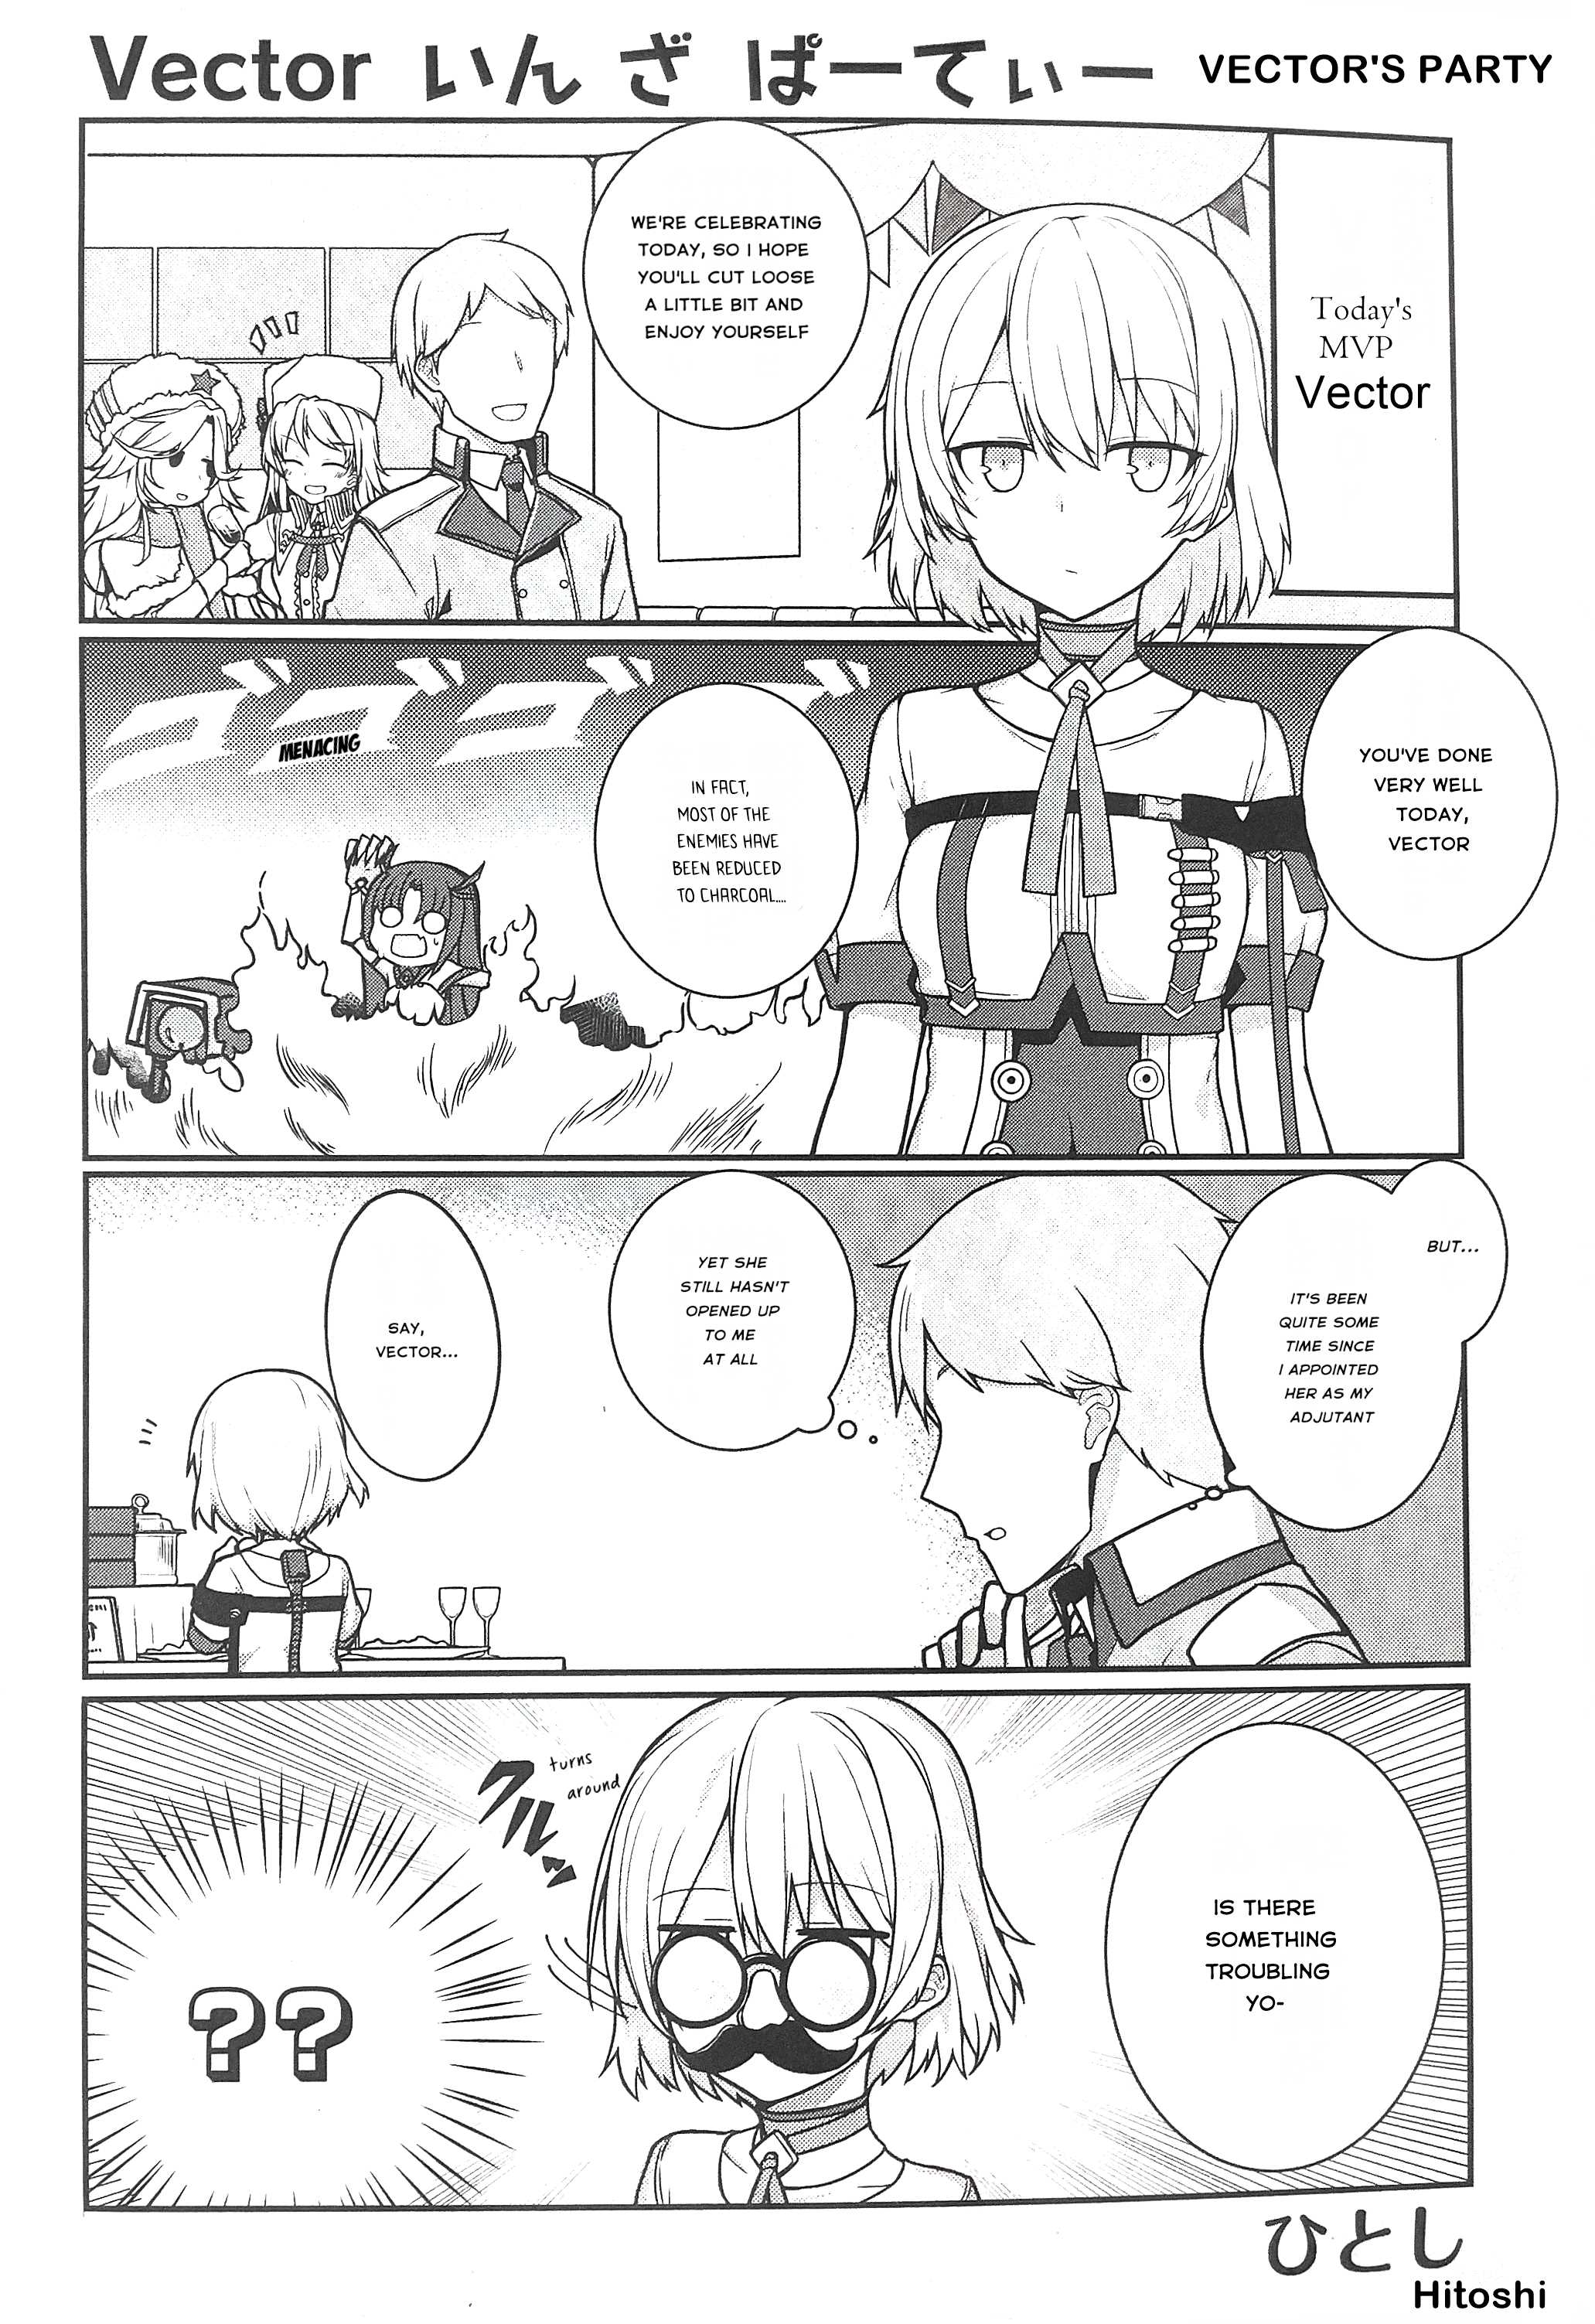 Dolls Frontline Comic Anthology - DNA Media 2019 - Chapter 21725 - Vector's Party - Image 1